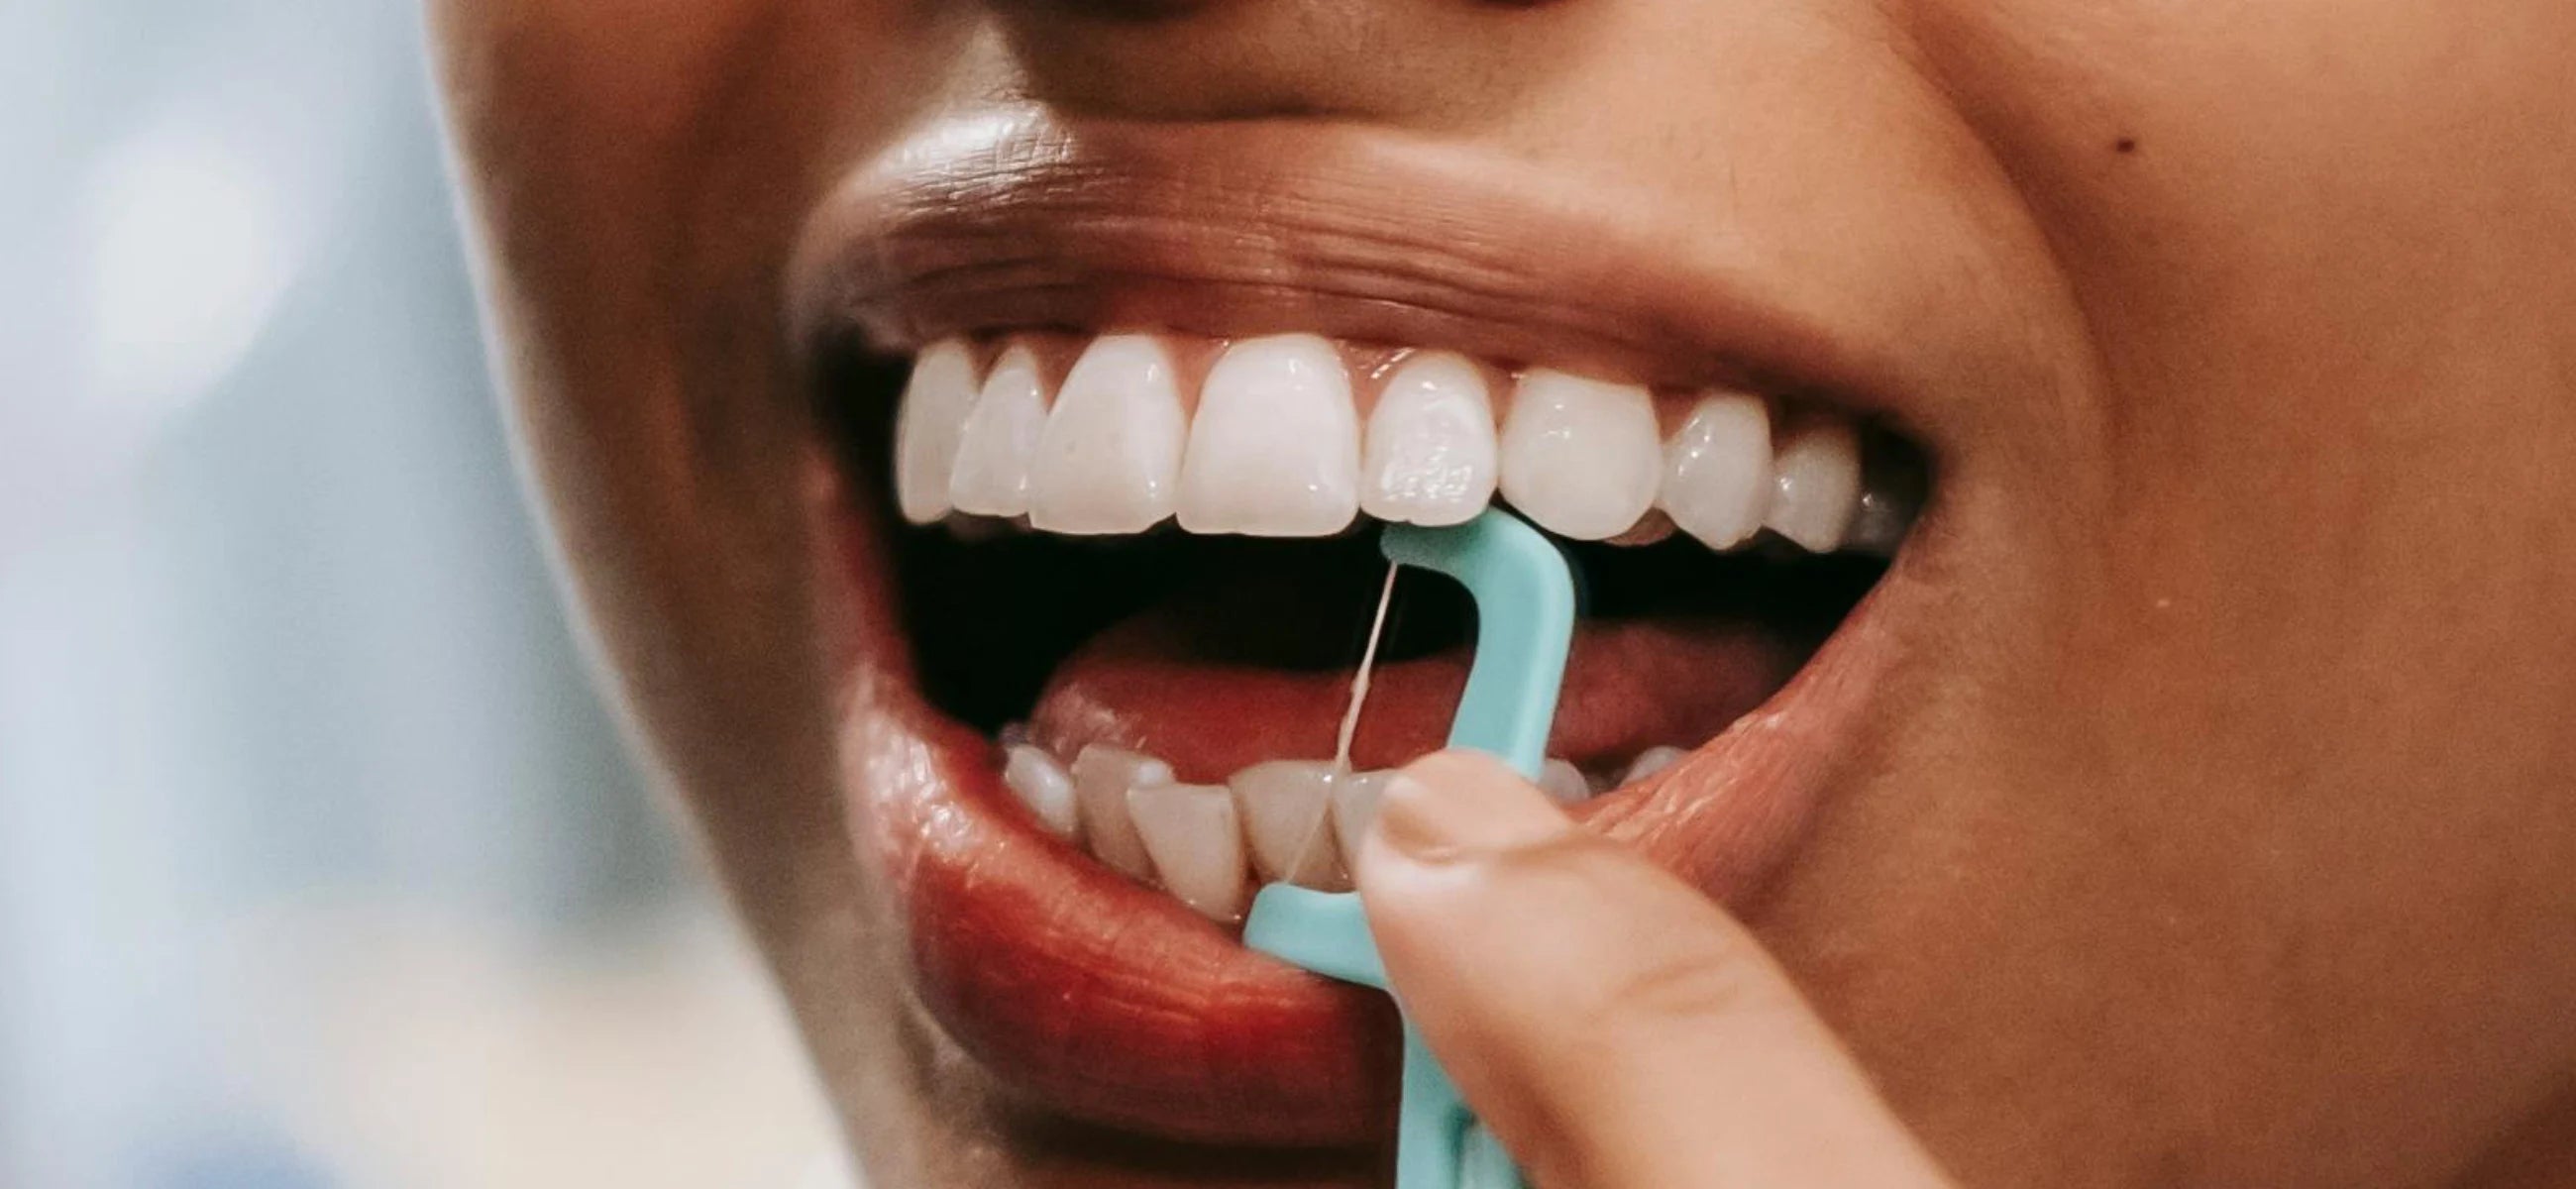 A complete guide to using dental floss to help oral healthy